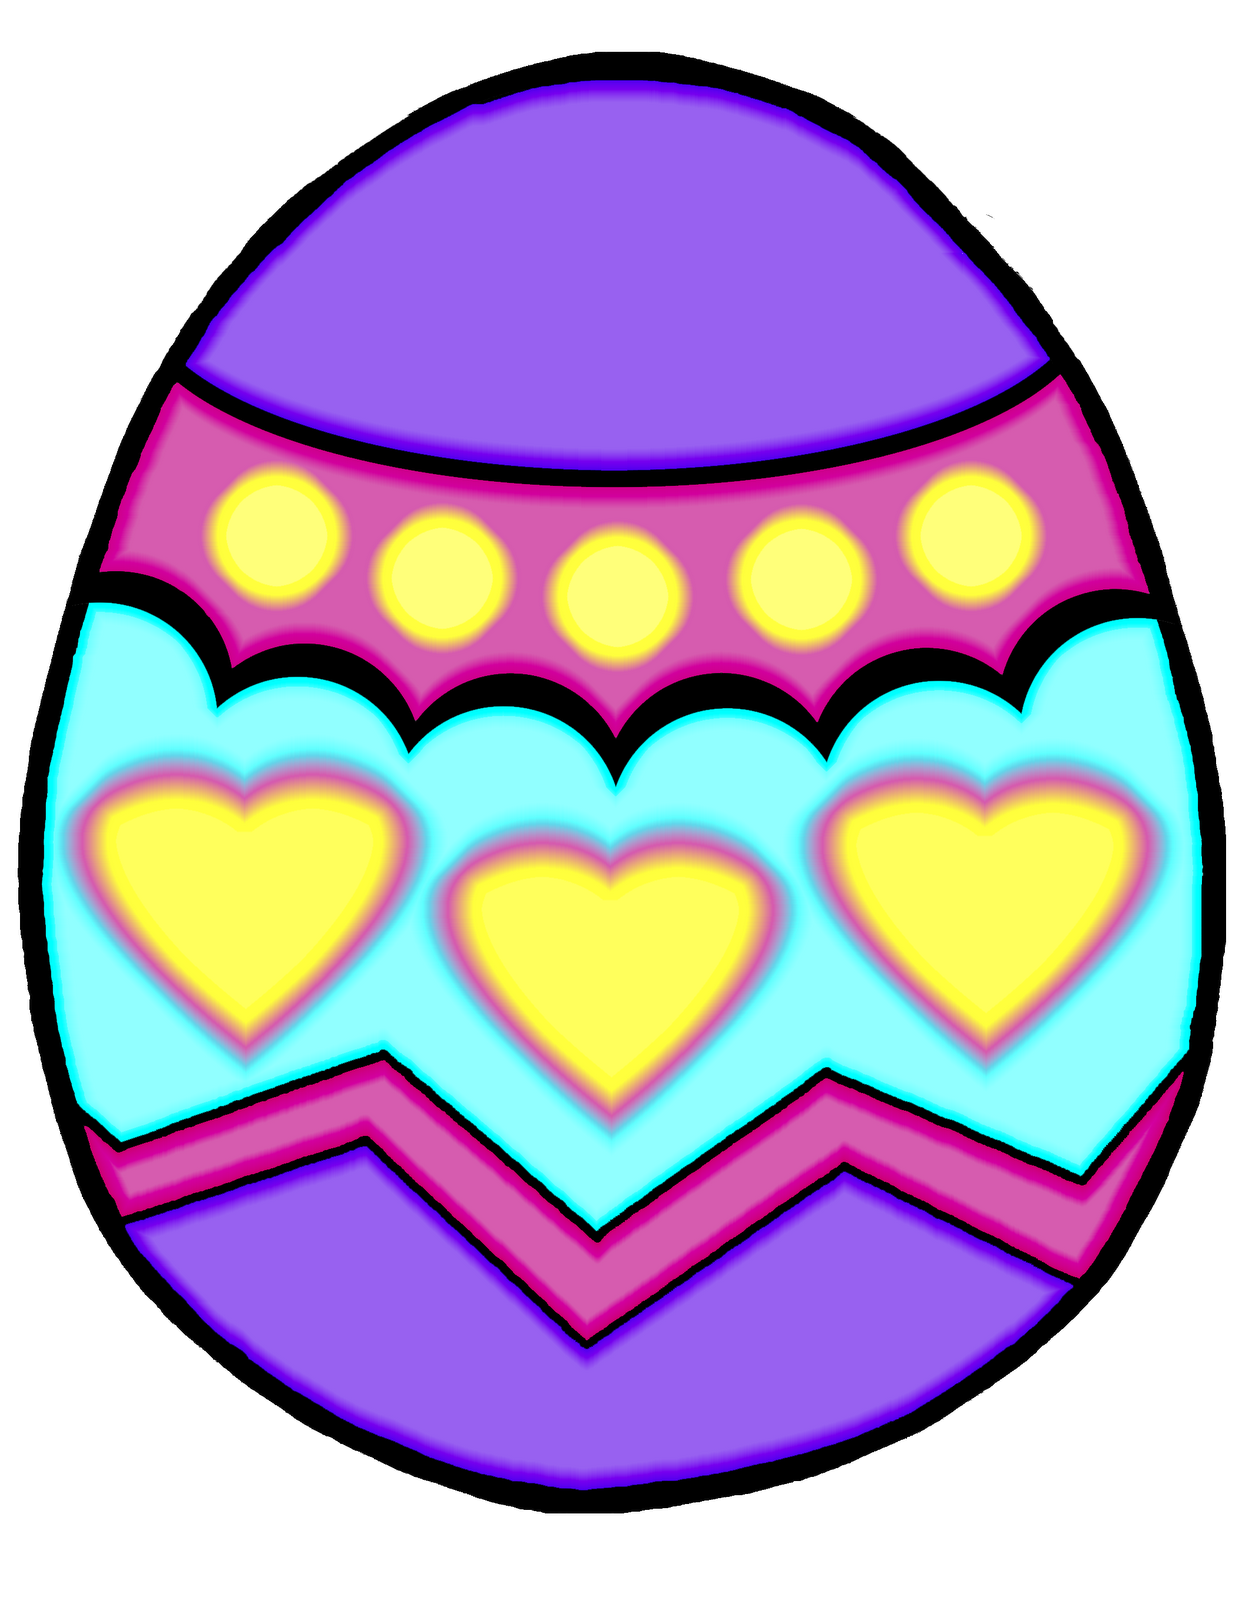 Easter egg clipart free clipart images 10